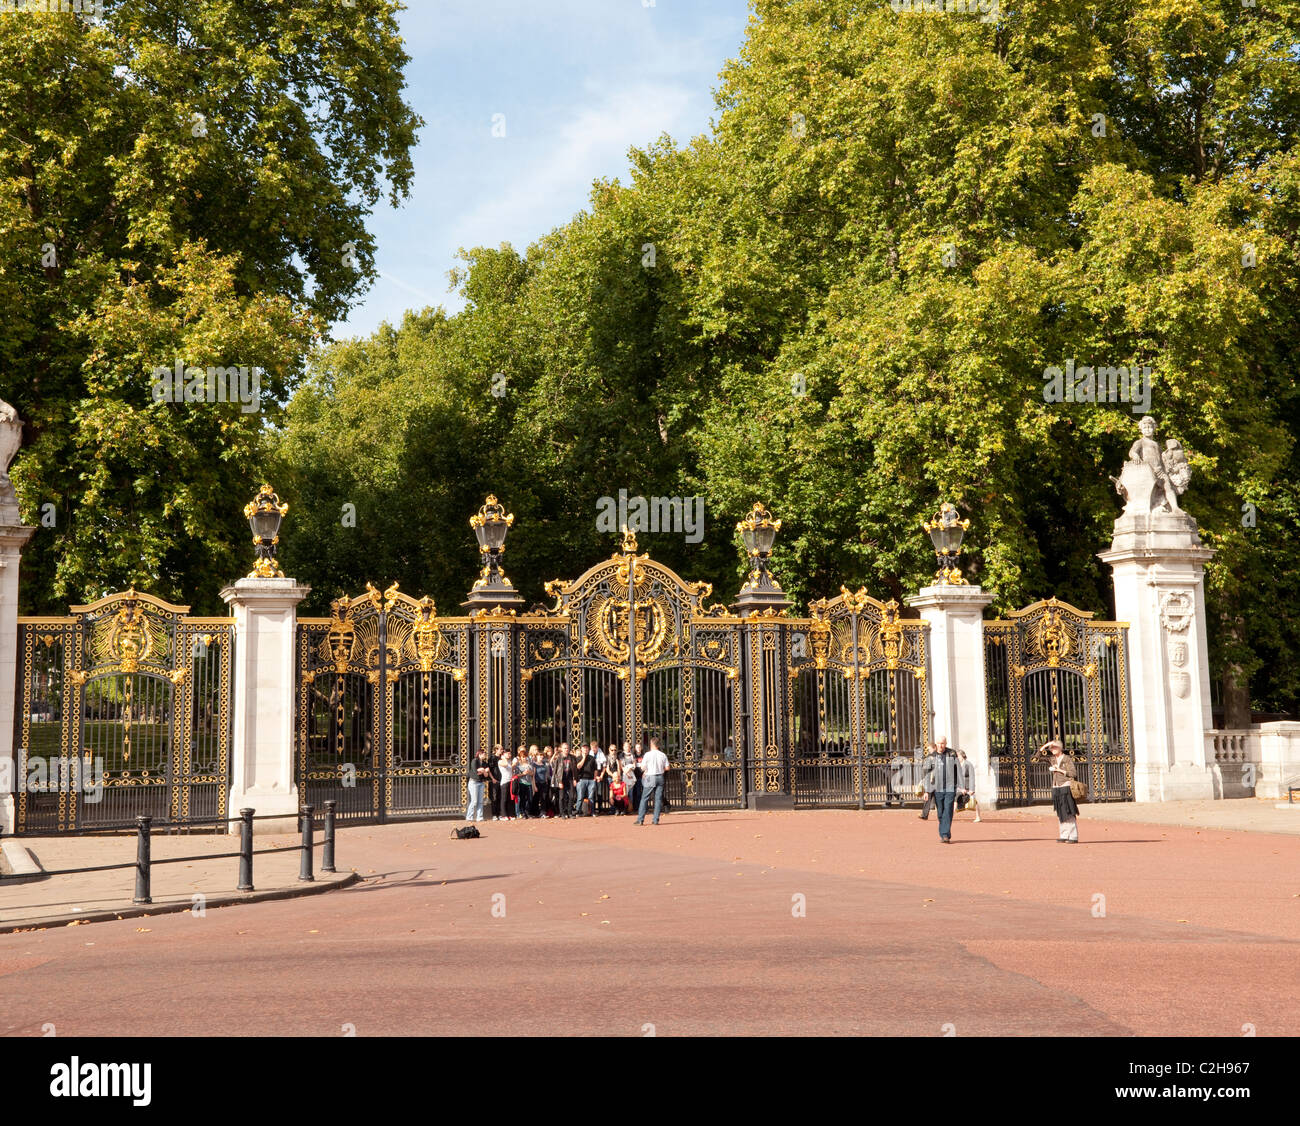 There are tall ornamented gates at the entrance to Green Park opposite Buckingham Palace in London. Stock Photo